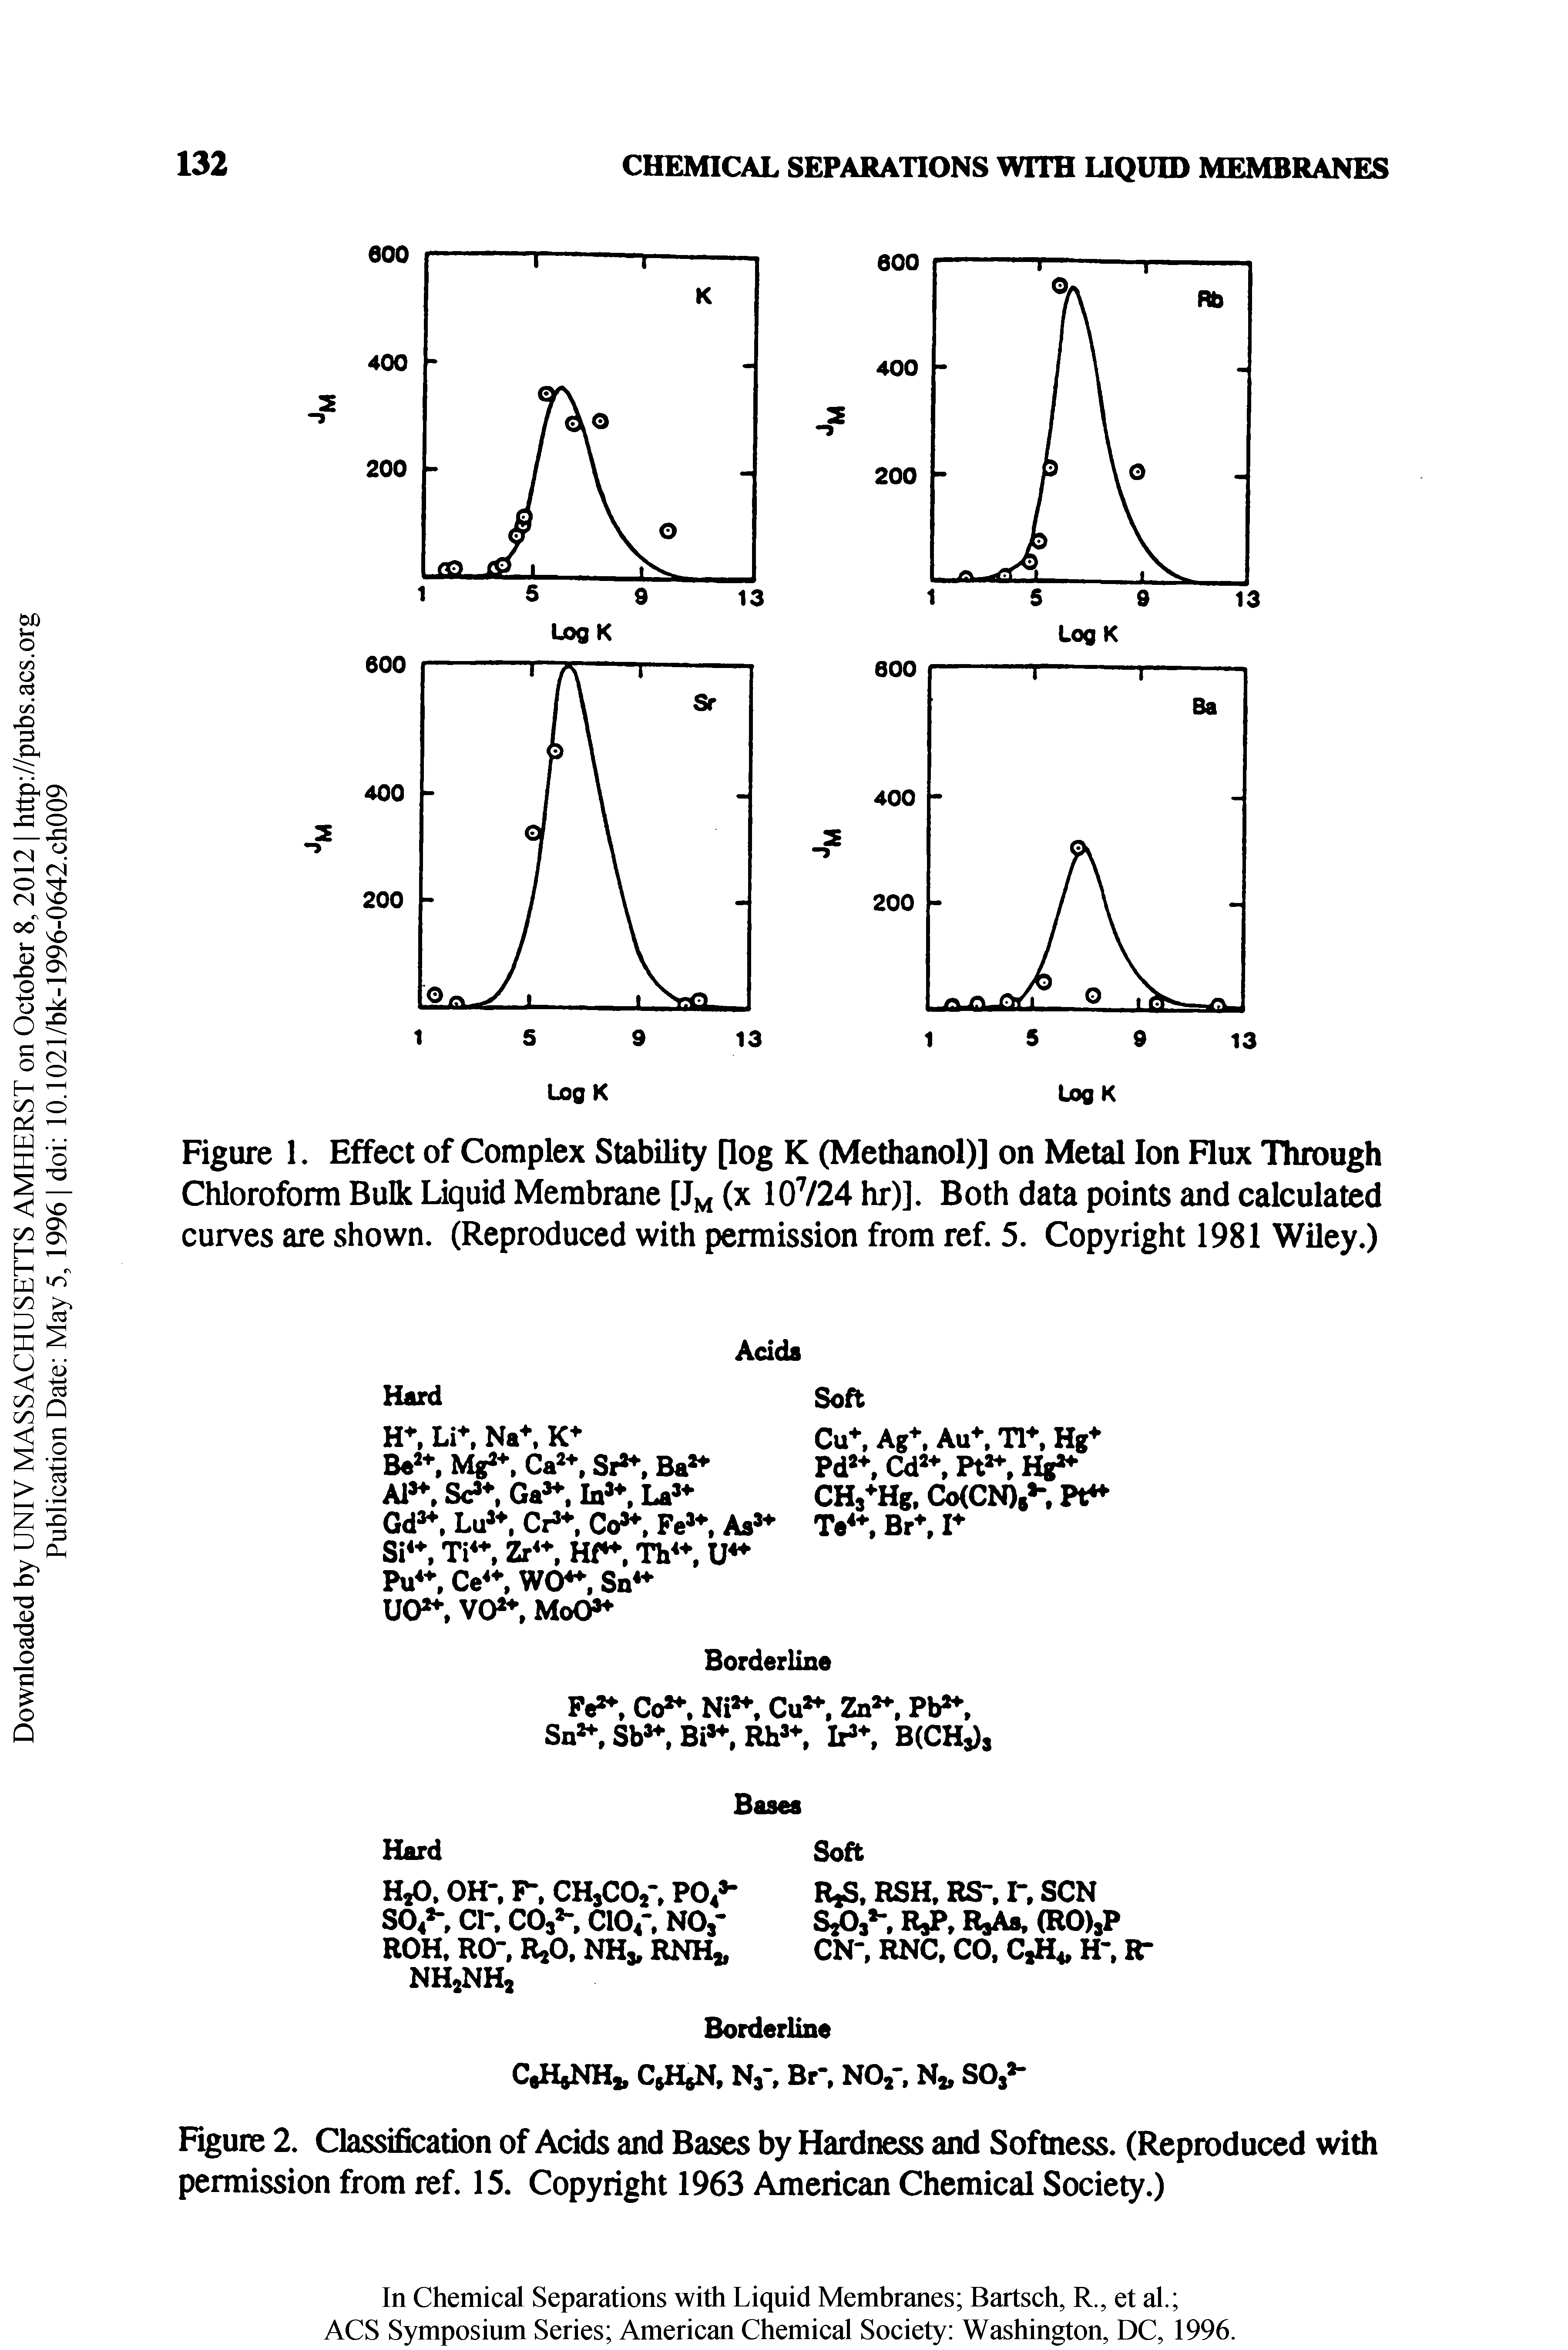 Figure 2. Classification of Acids and Bases by Hardness and Softness. (Reproduced with permission from ref. 15. Copyright 1963 American Chemical Society.)...